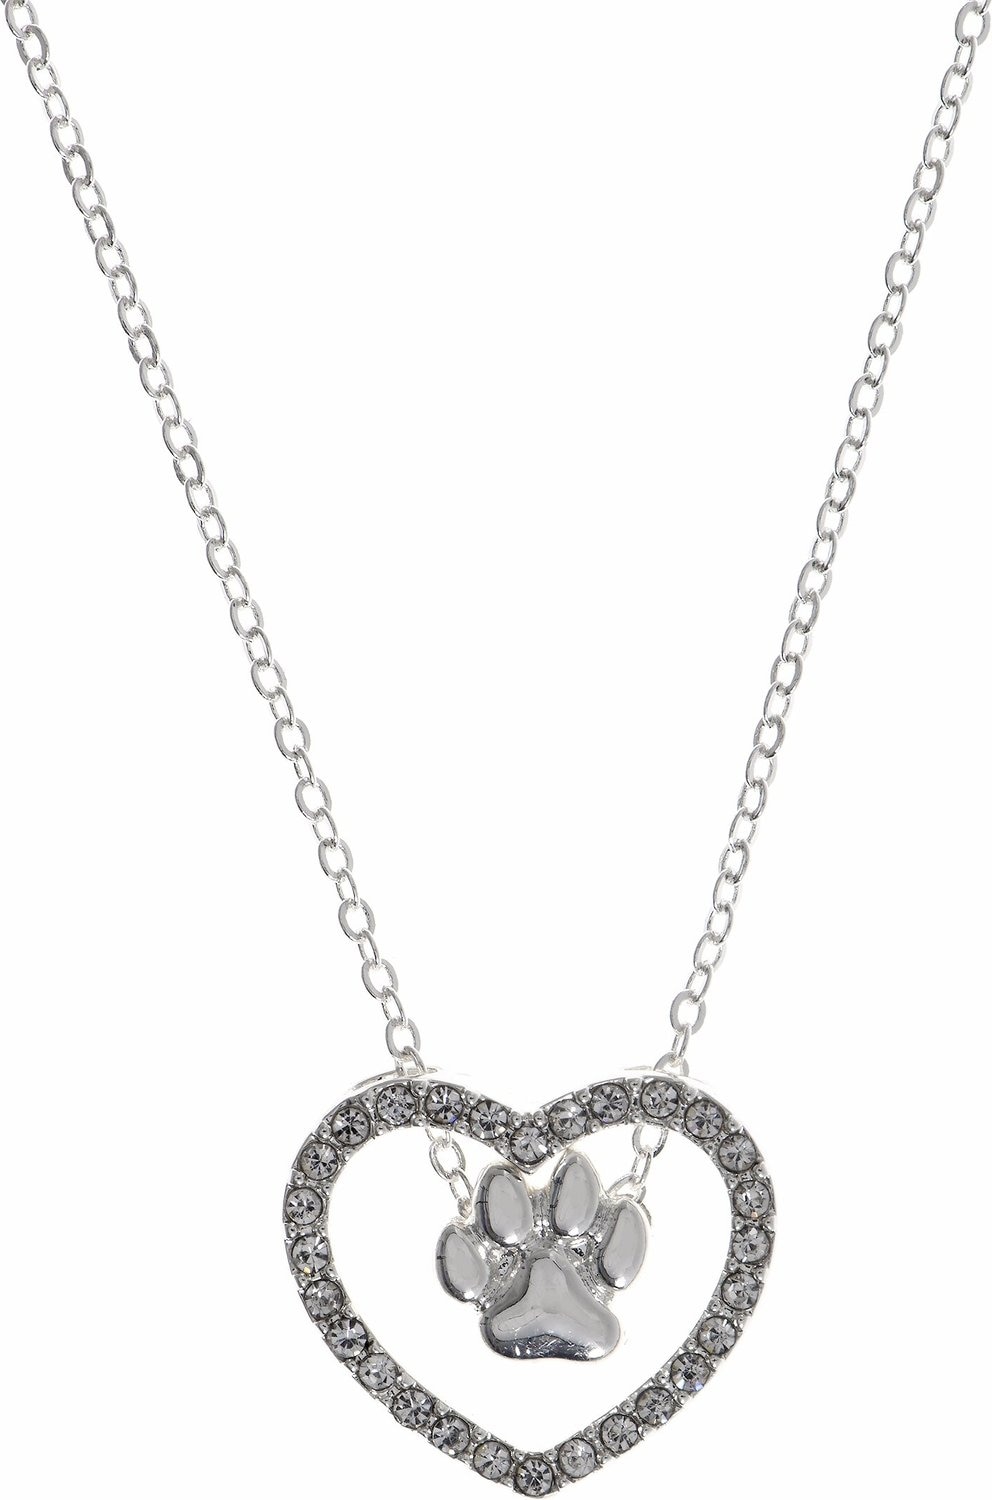 heart paw necklace